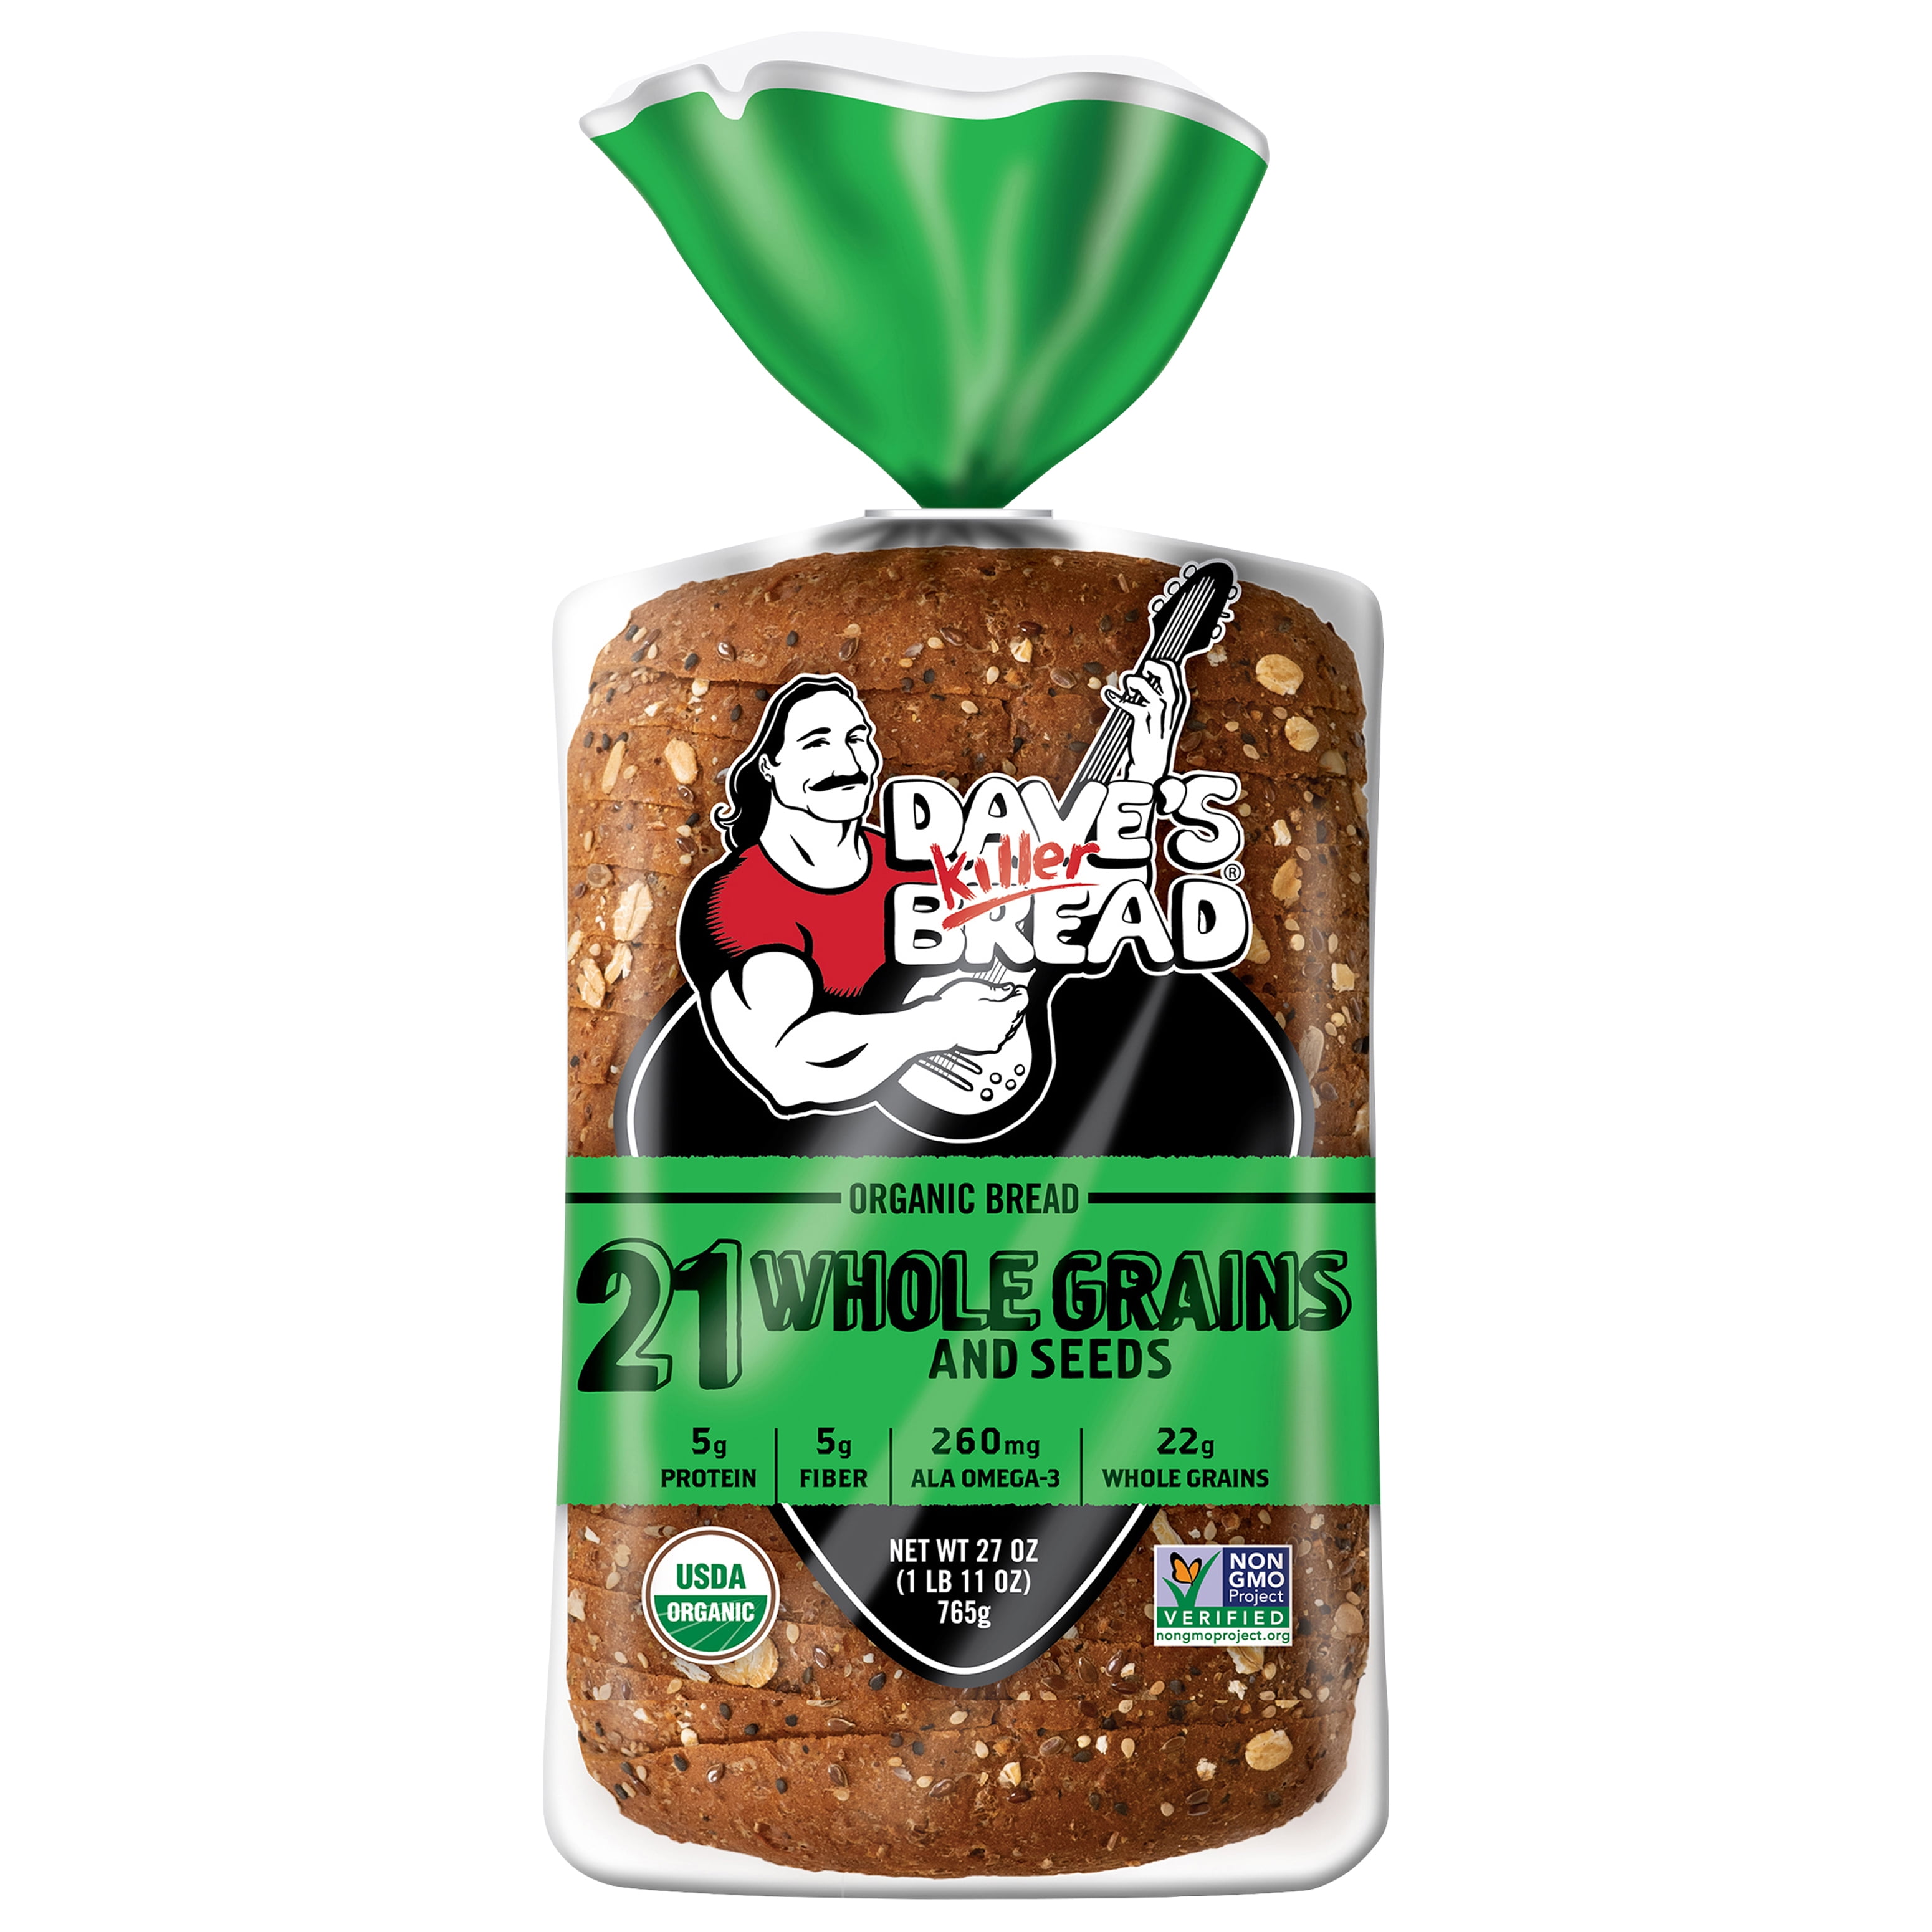 dave-s-killer-bread-21-whole-grains-and-seeds-organic-bread-loaf-27-oz